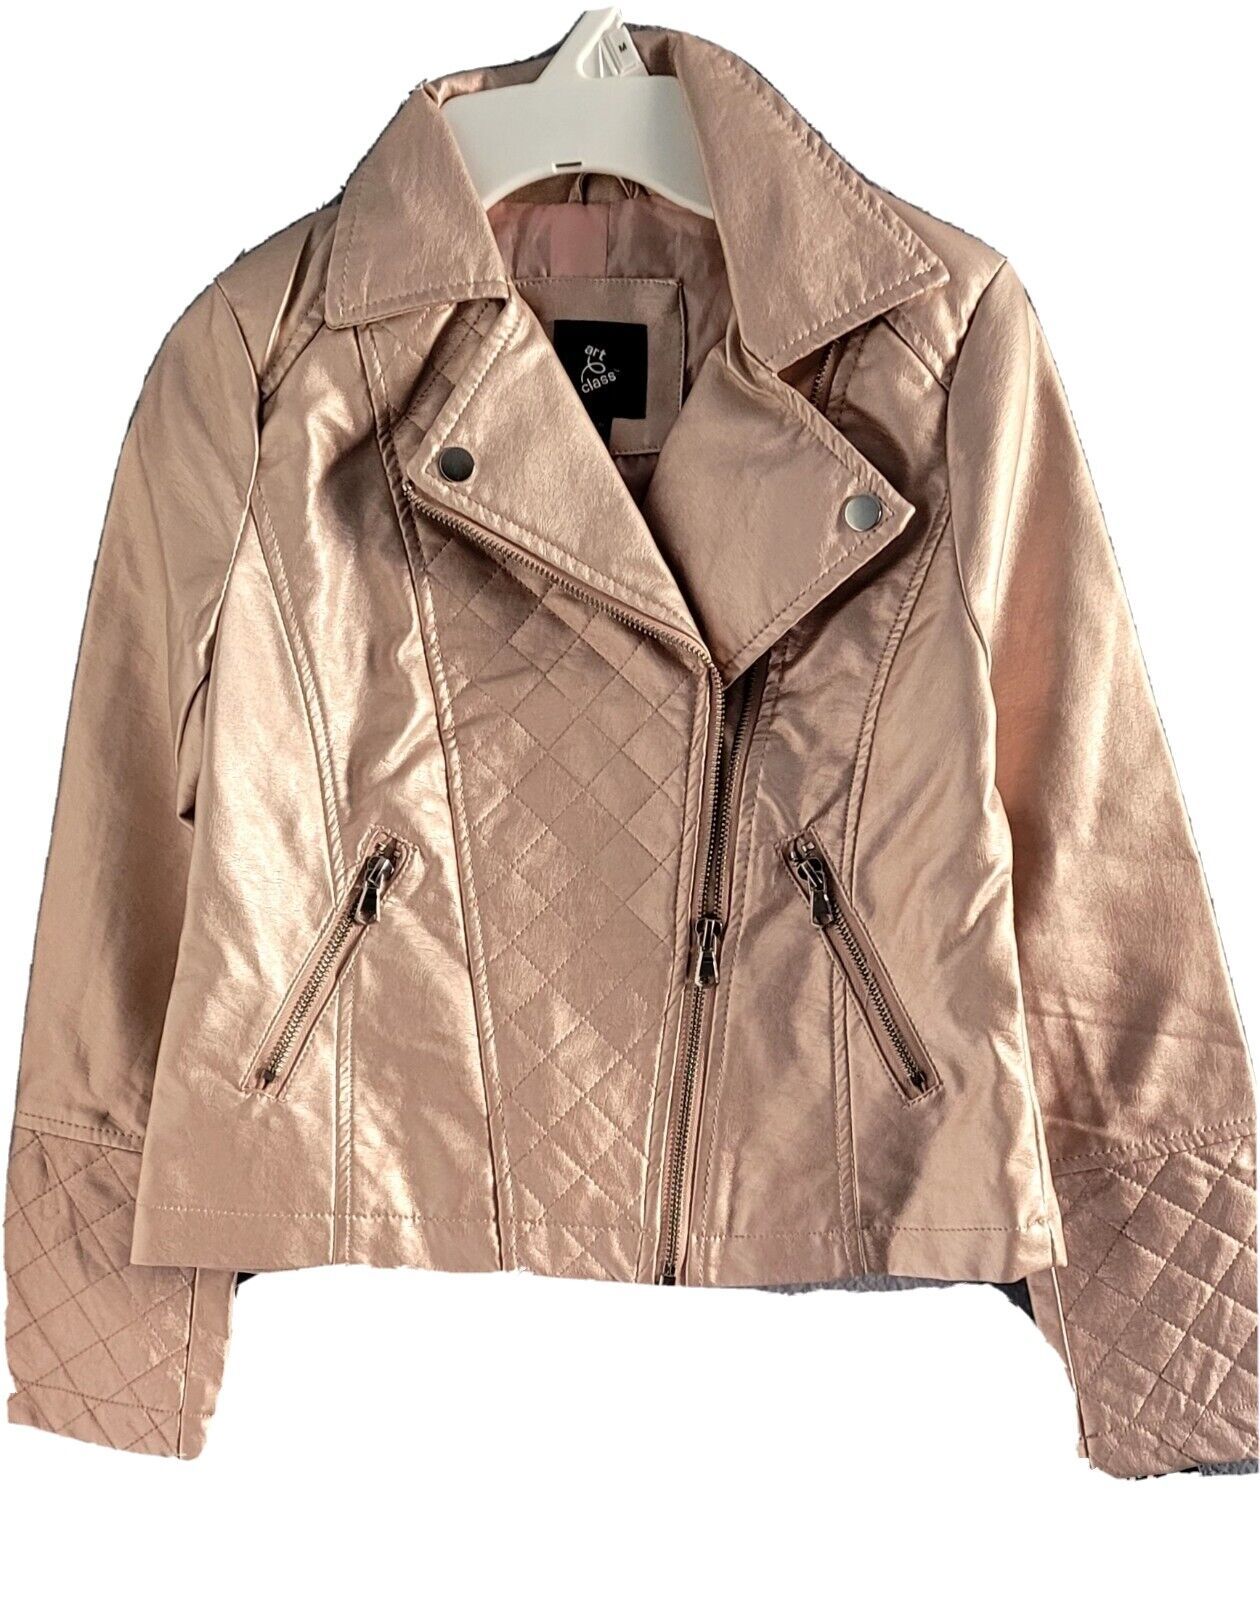 Target Art Class Girls Faux Leather Full Zip Moto Jacket Size M 7/8 Pink New - £11.40 GBP